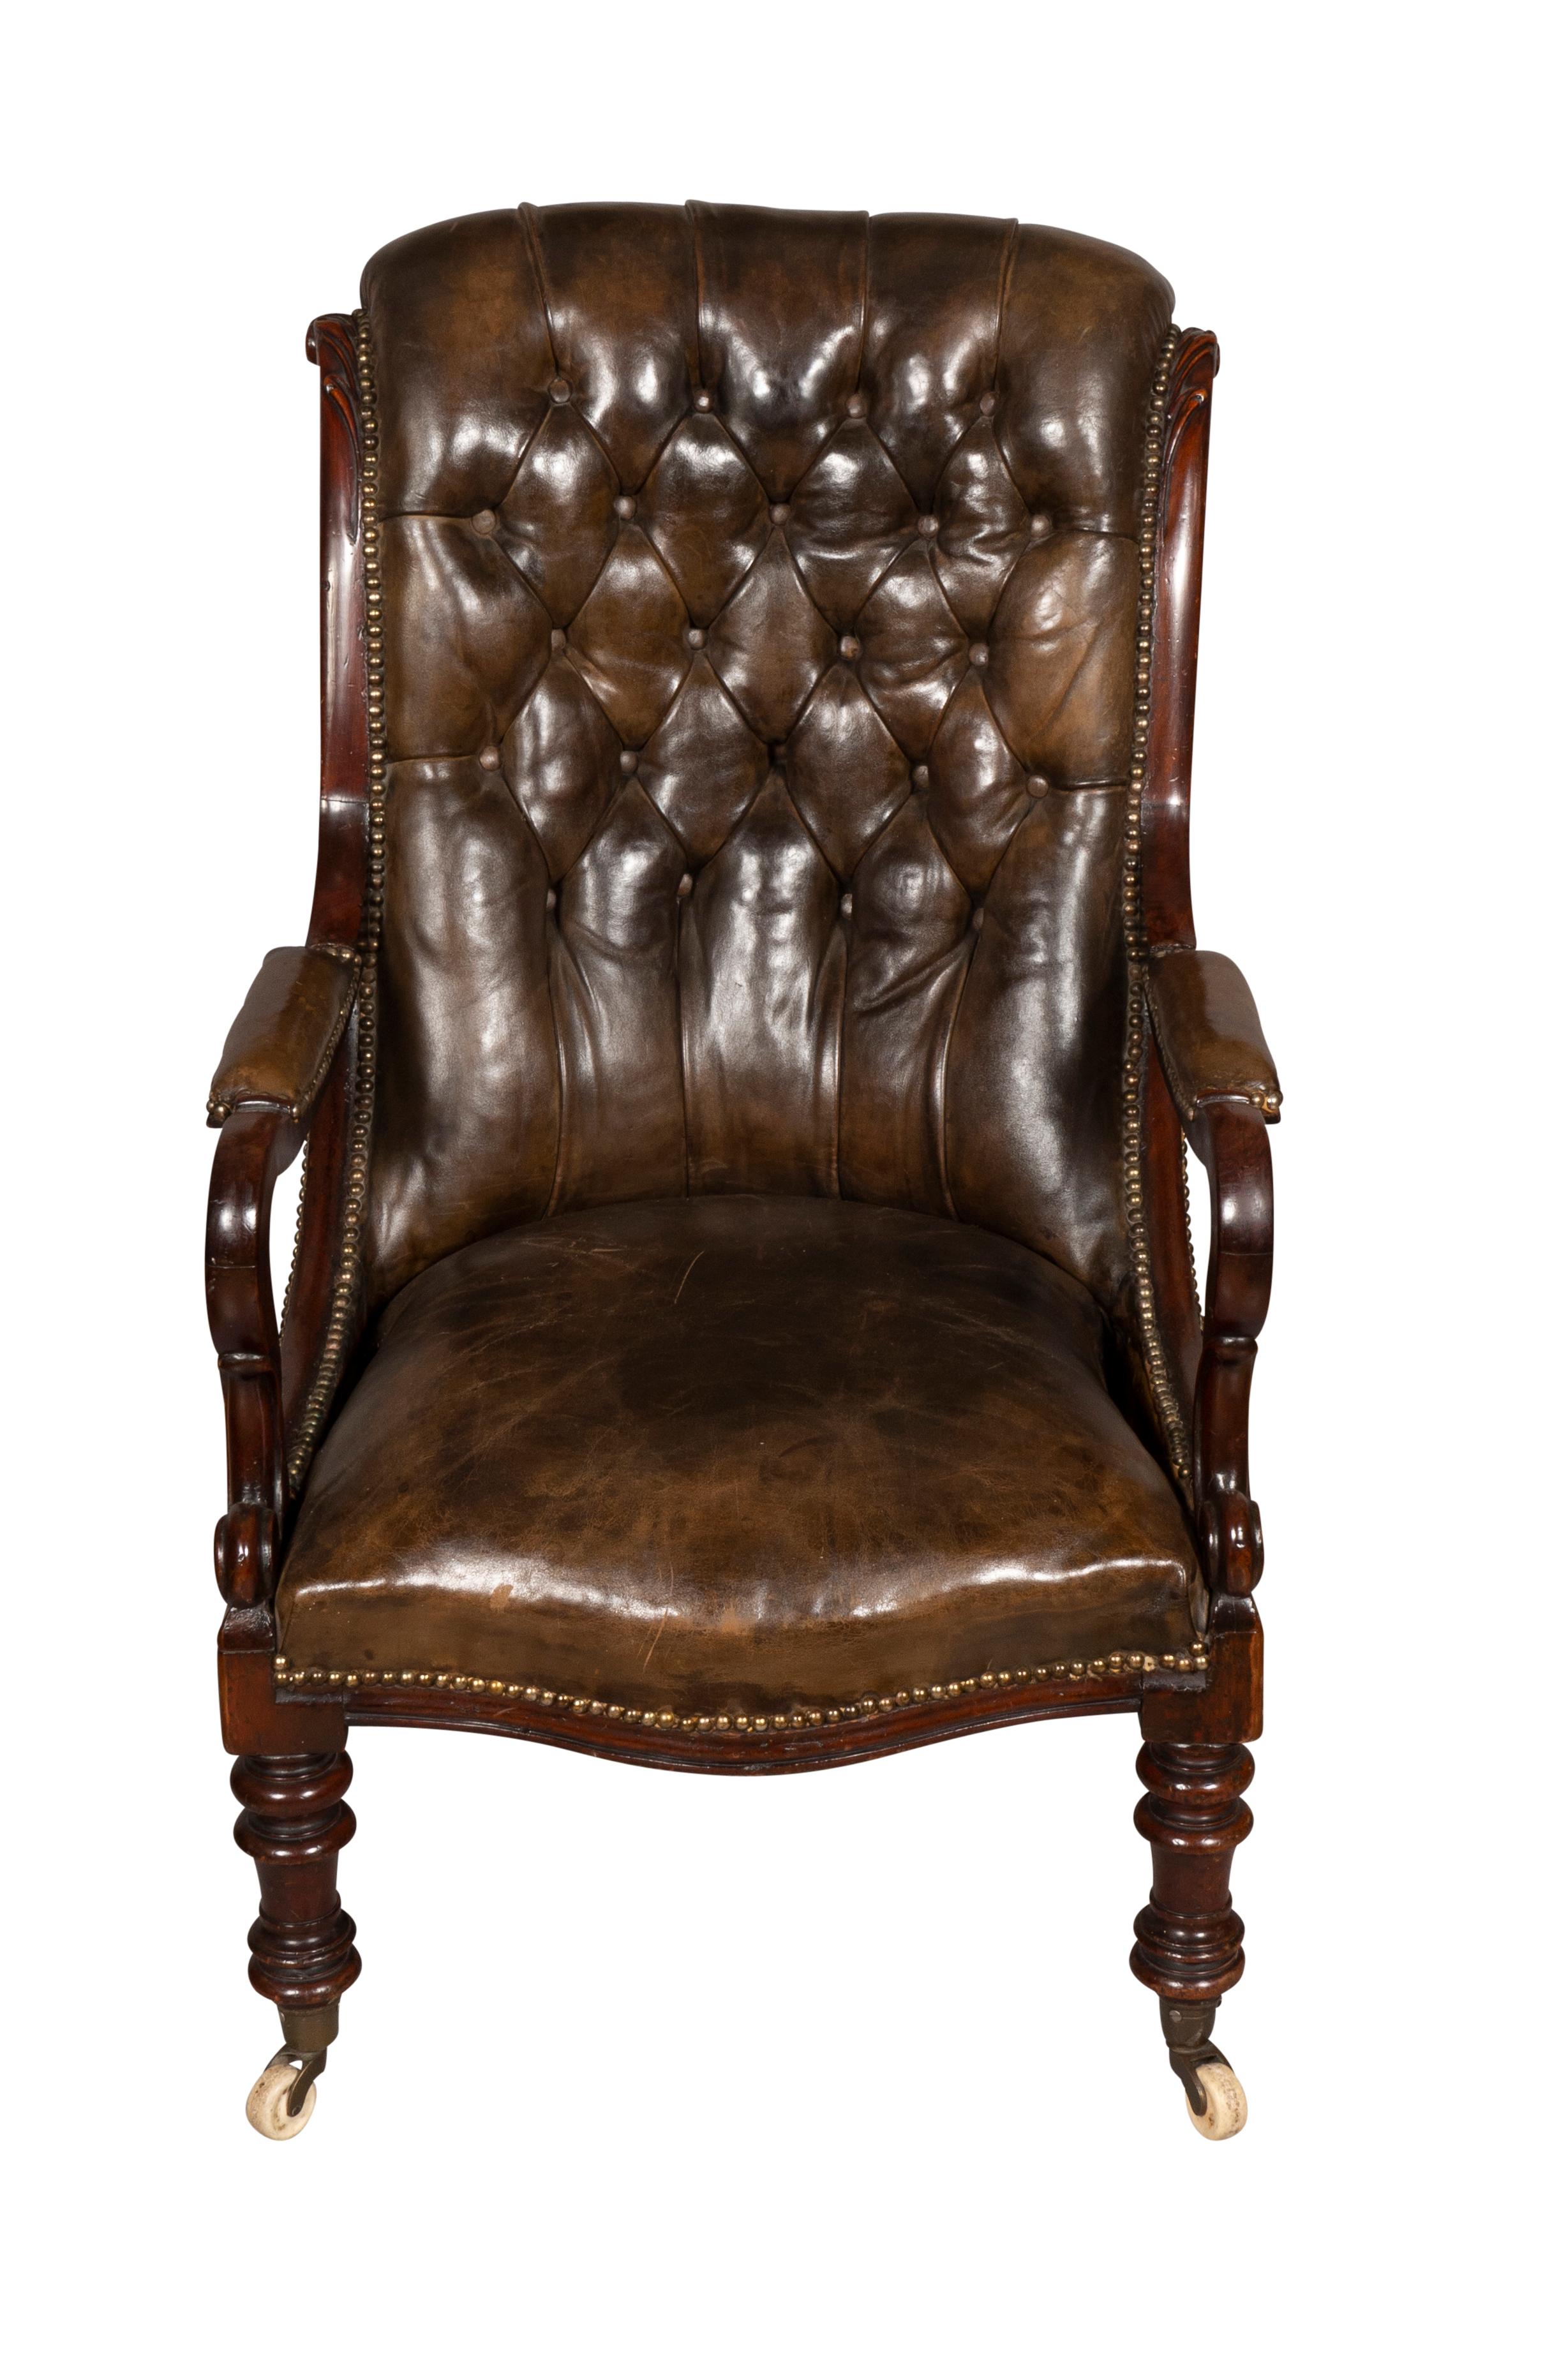 With tufted brown leather upholstery raised on turned tapered legs with casters.